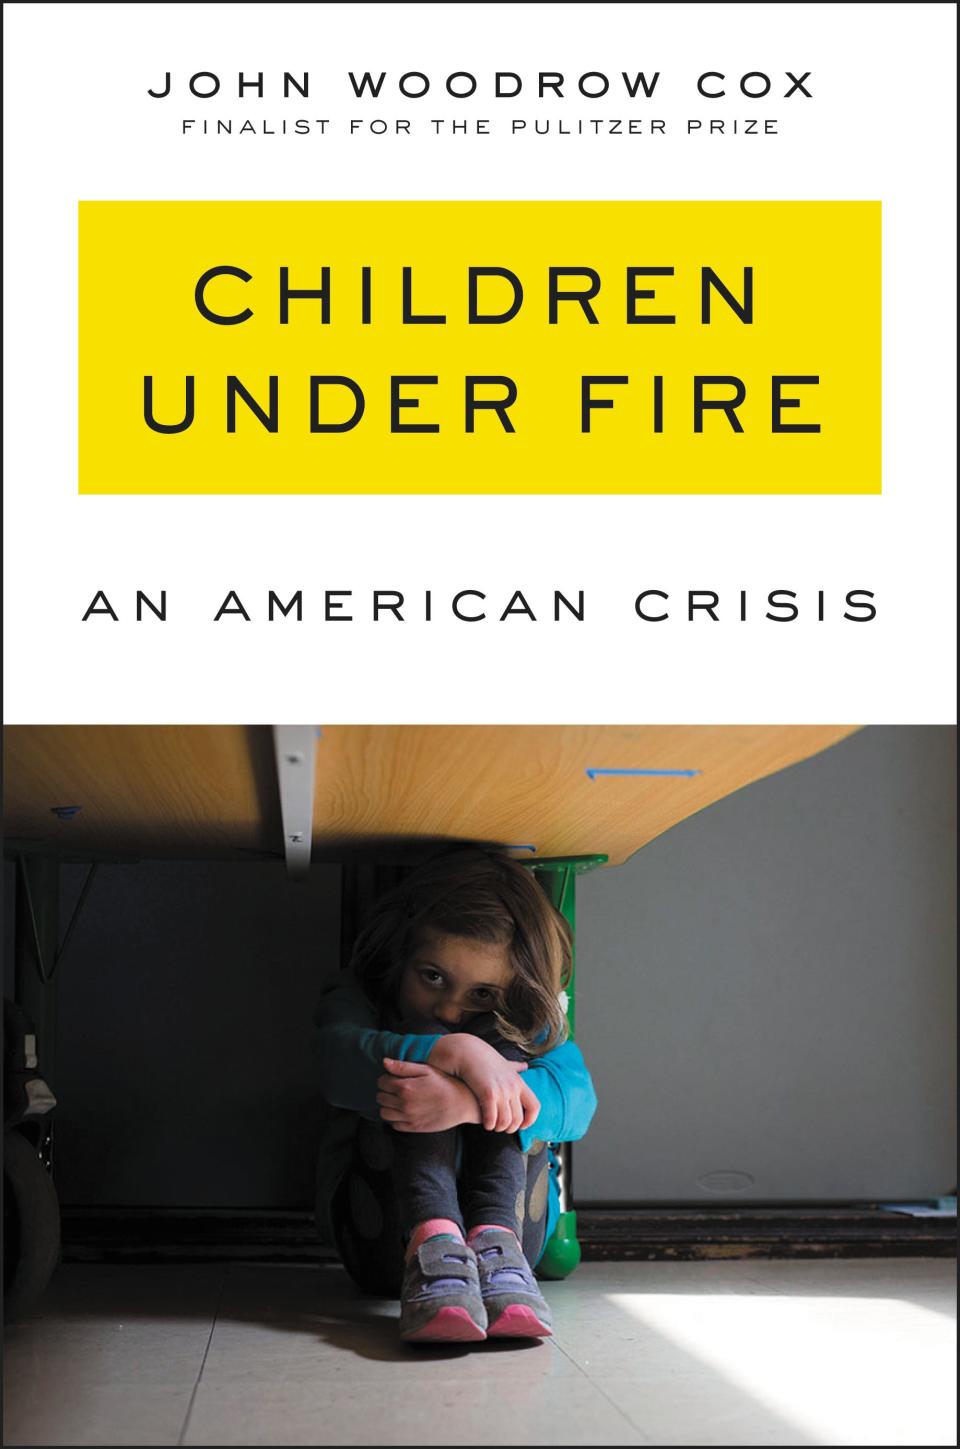 The book cover of John Woodrow Cox's new novel, "CHILDREN UNDER FIRE: An American Crisis," released March 30, 2021. (Photo courtesy of Ecco)